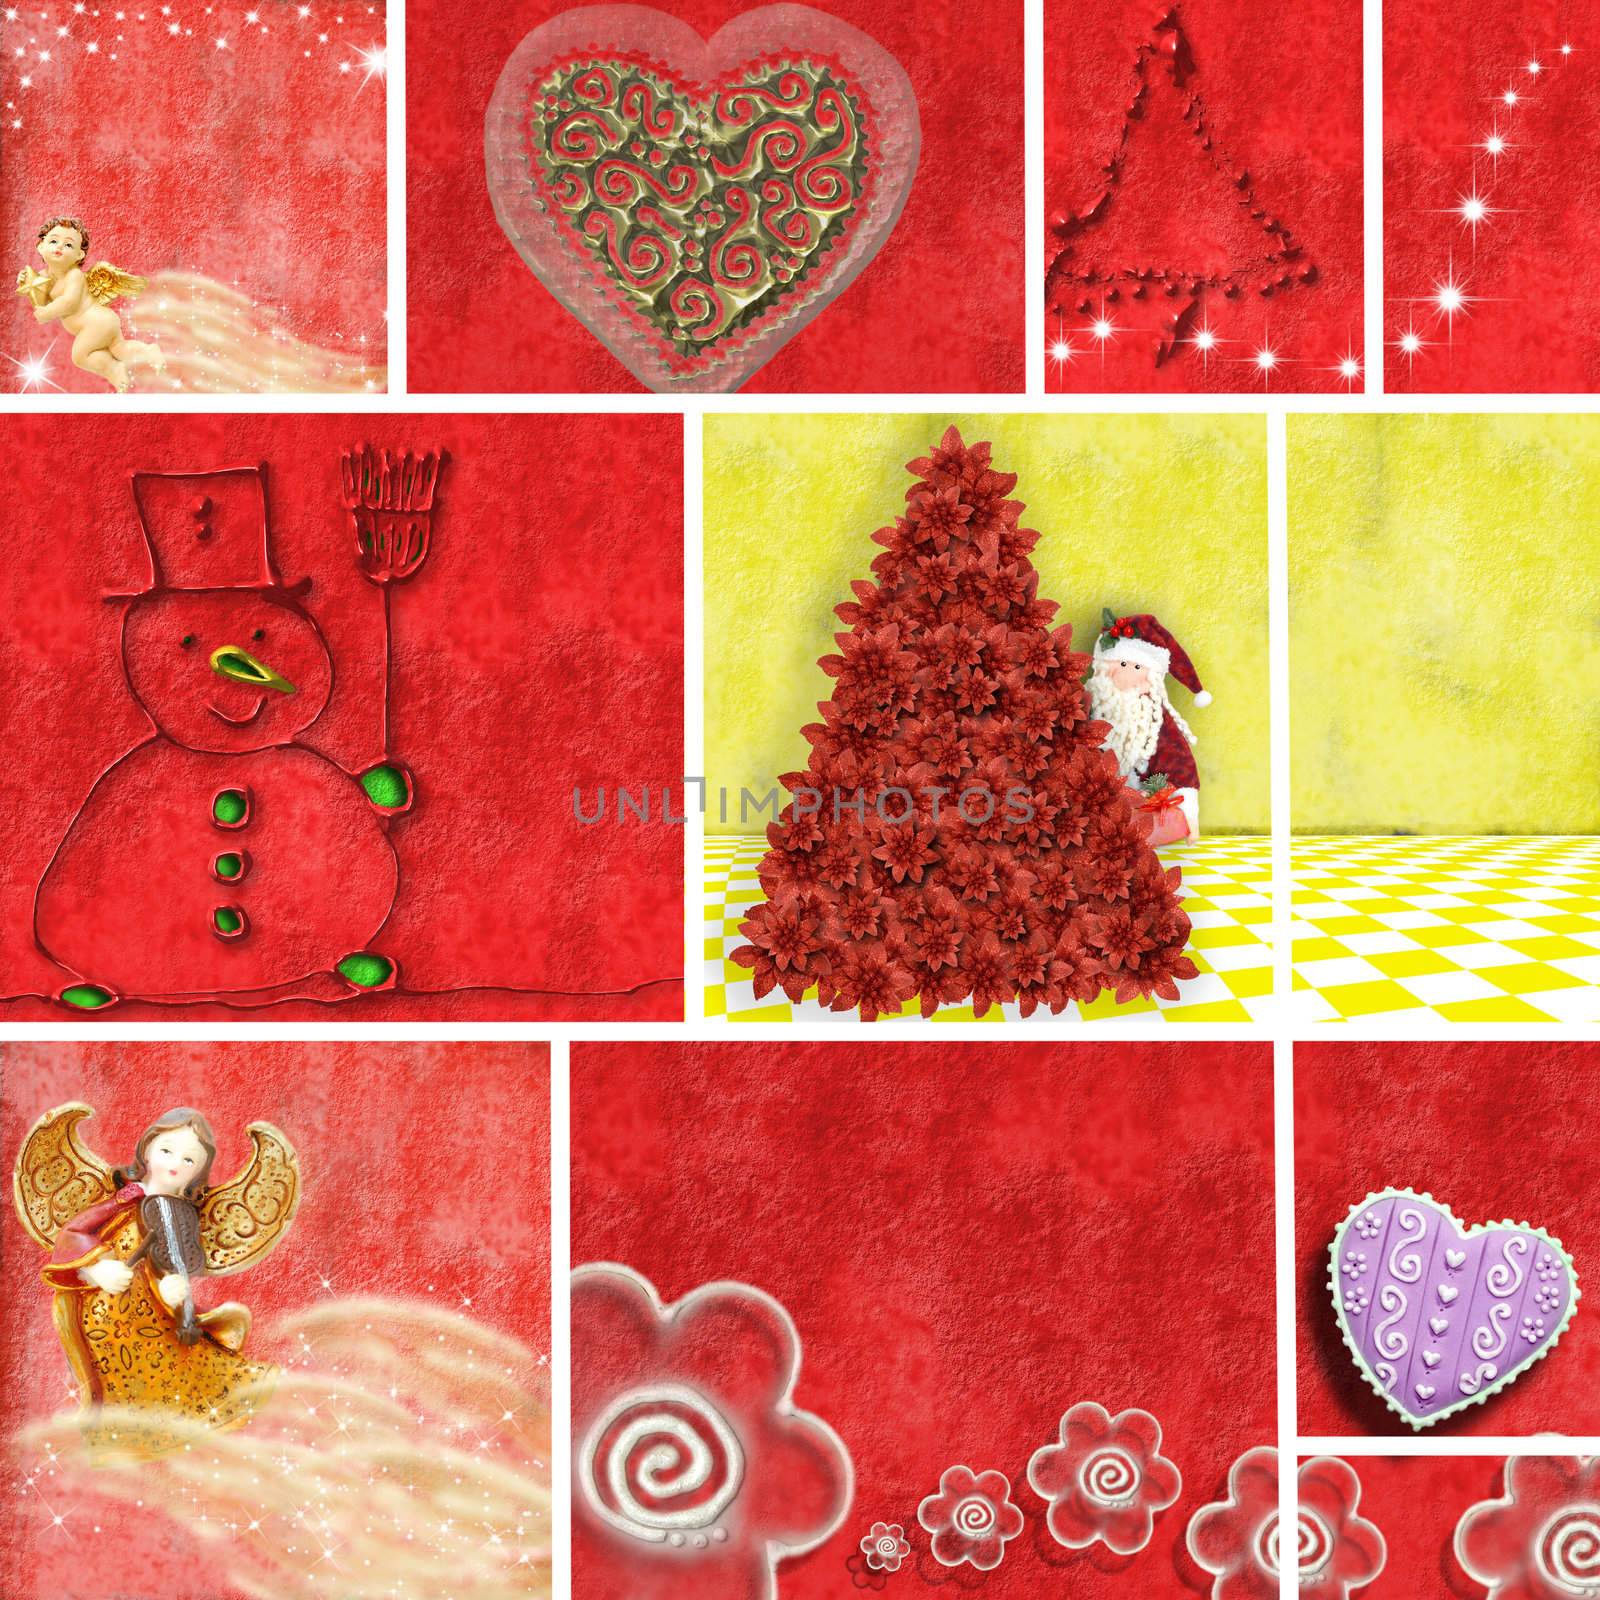 Collage illustration of Christmas time by Carche